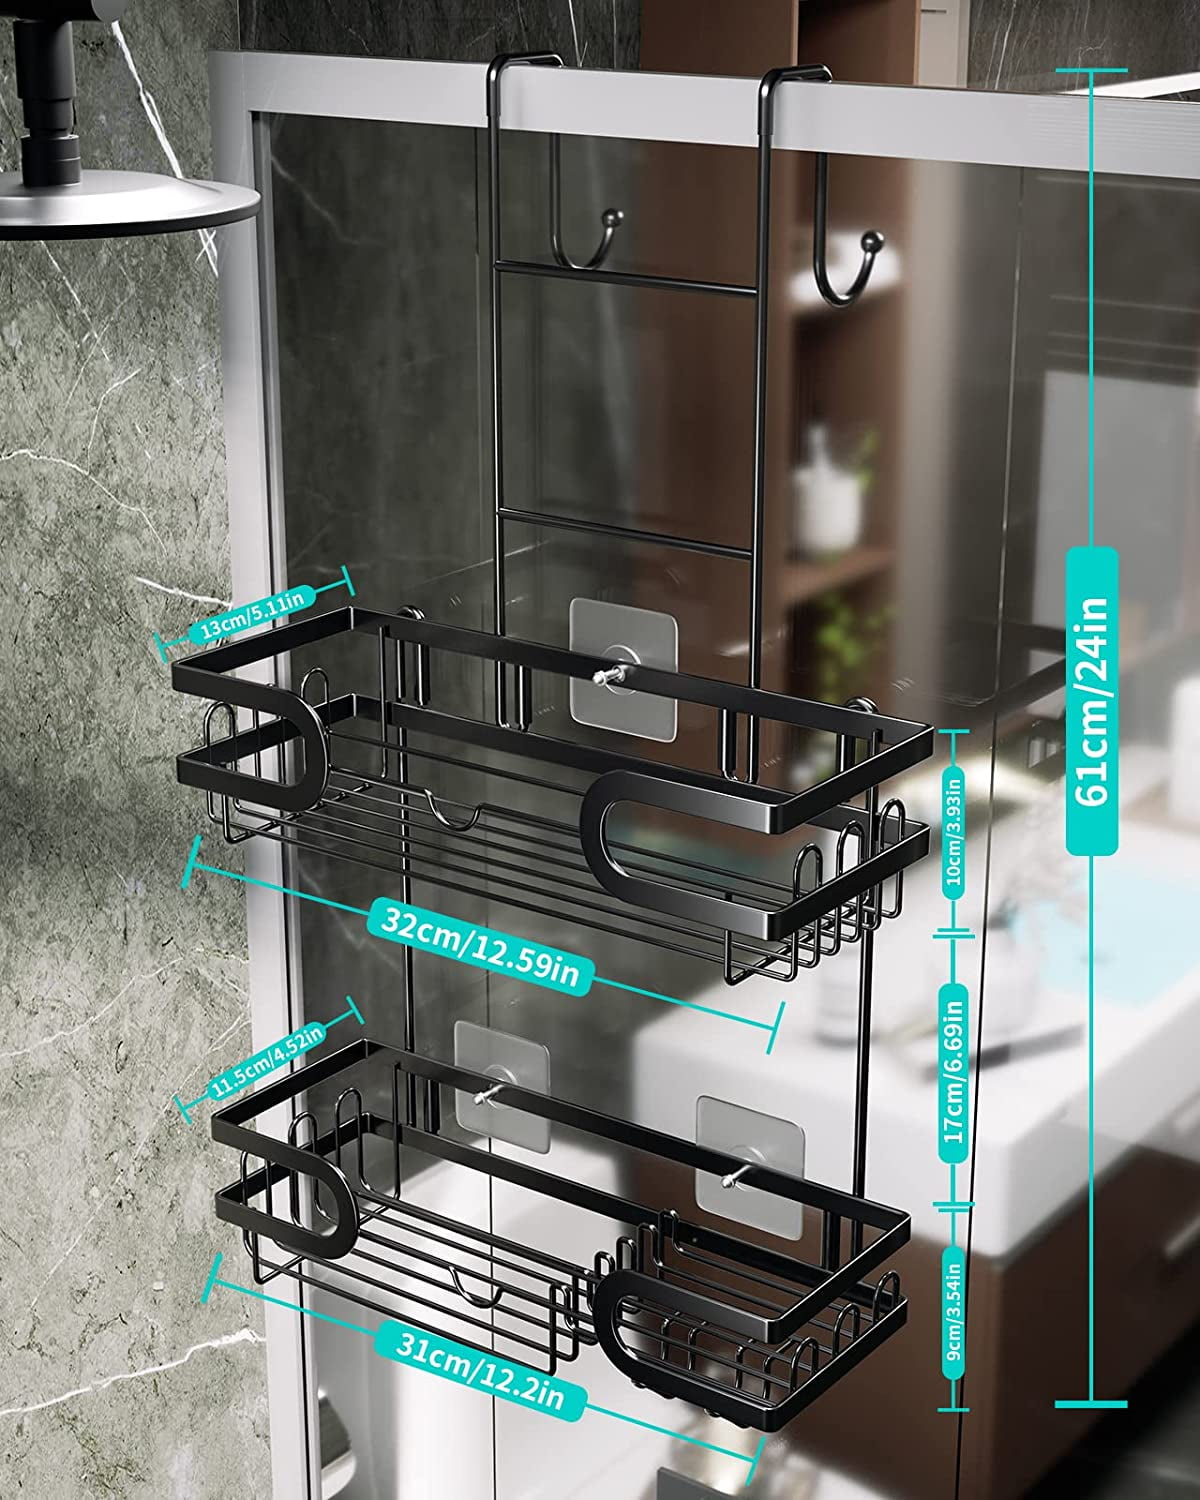 Hartselle Hanging Shower Caddy